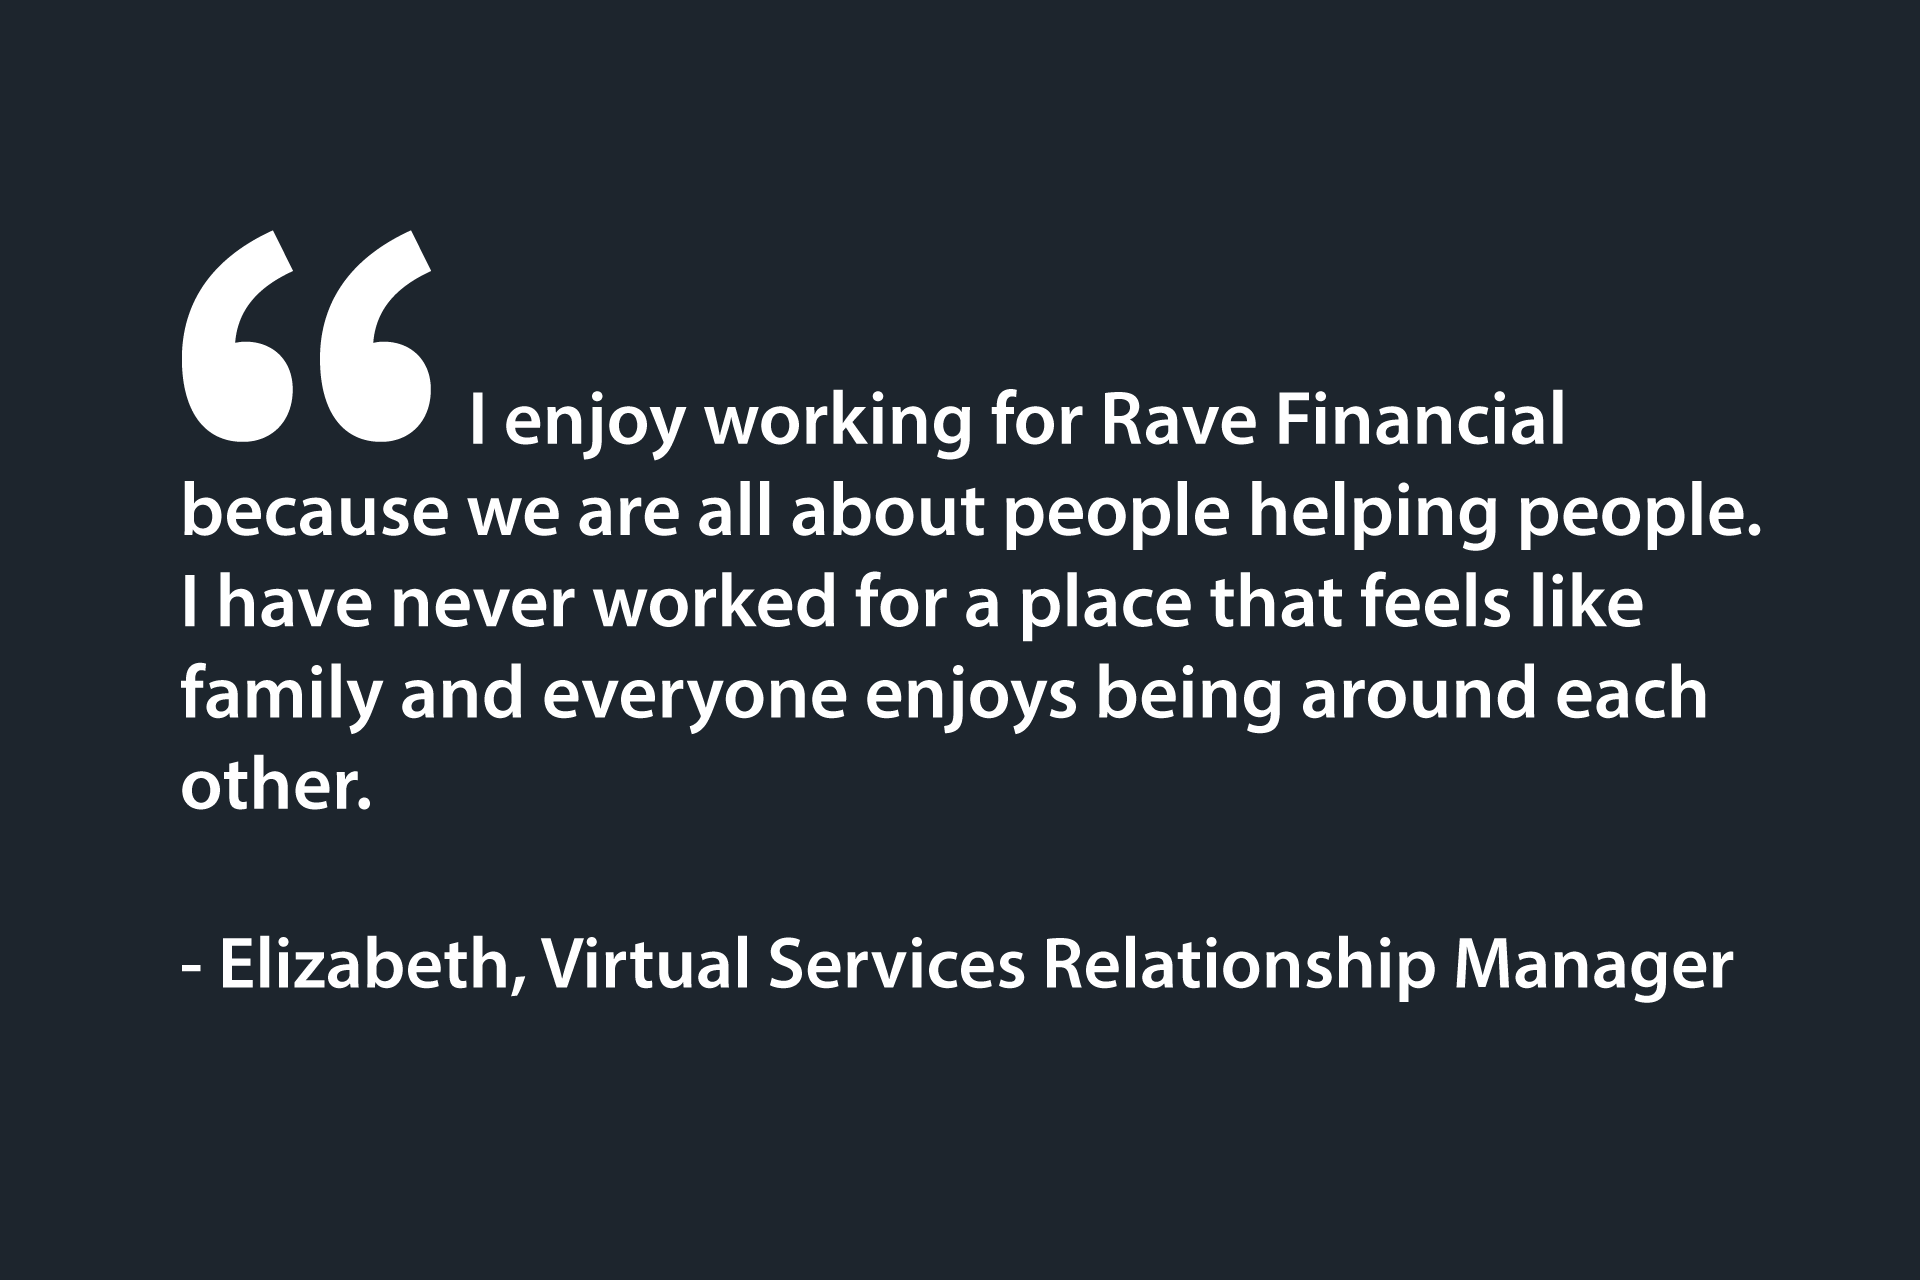 I enjoy working for Rave Financial because we are all about people helping people. I have never worked for a place that feels like family and everyone enjoys being around each other. - Elizabeth, Virtual Services Relationship Manager